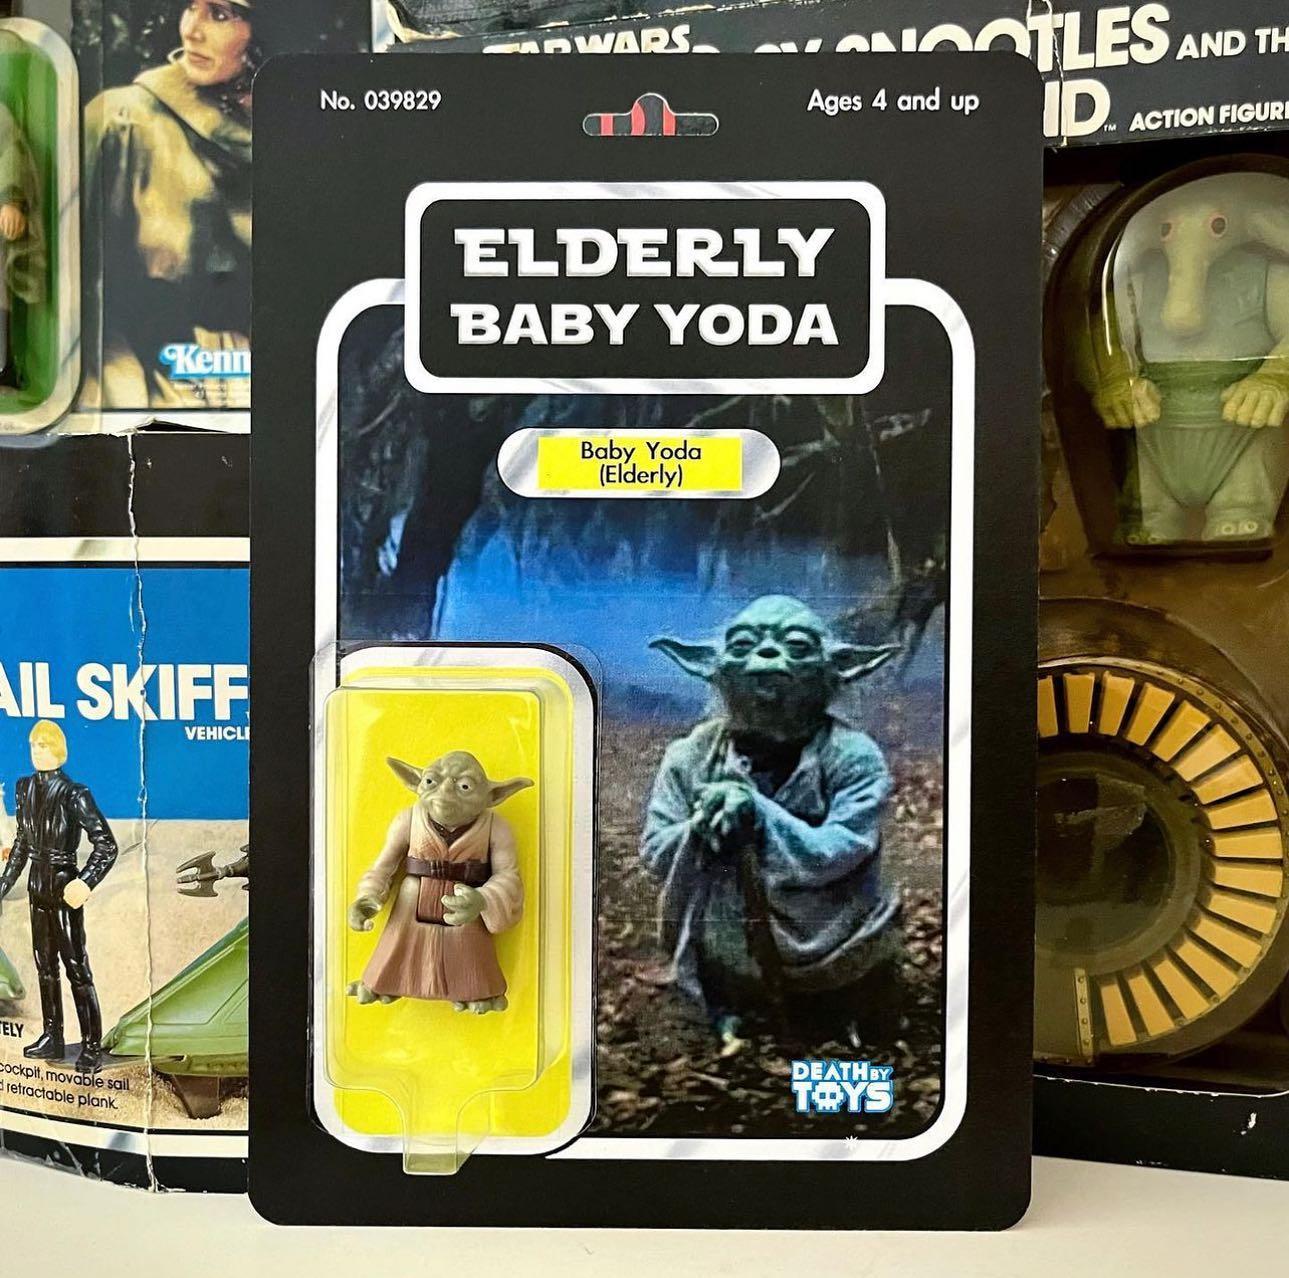 dank memes - action figure - Ail Skiff Tely Kenn Cockpit, movable sail dretractable plank Vehicle No. 039829 Wars Elderly Baby Yoda Baby Yoda Elderly Ages 4 and up Ootles And The Id Action Figure Death By Trys 20 Ii